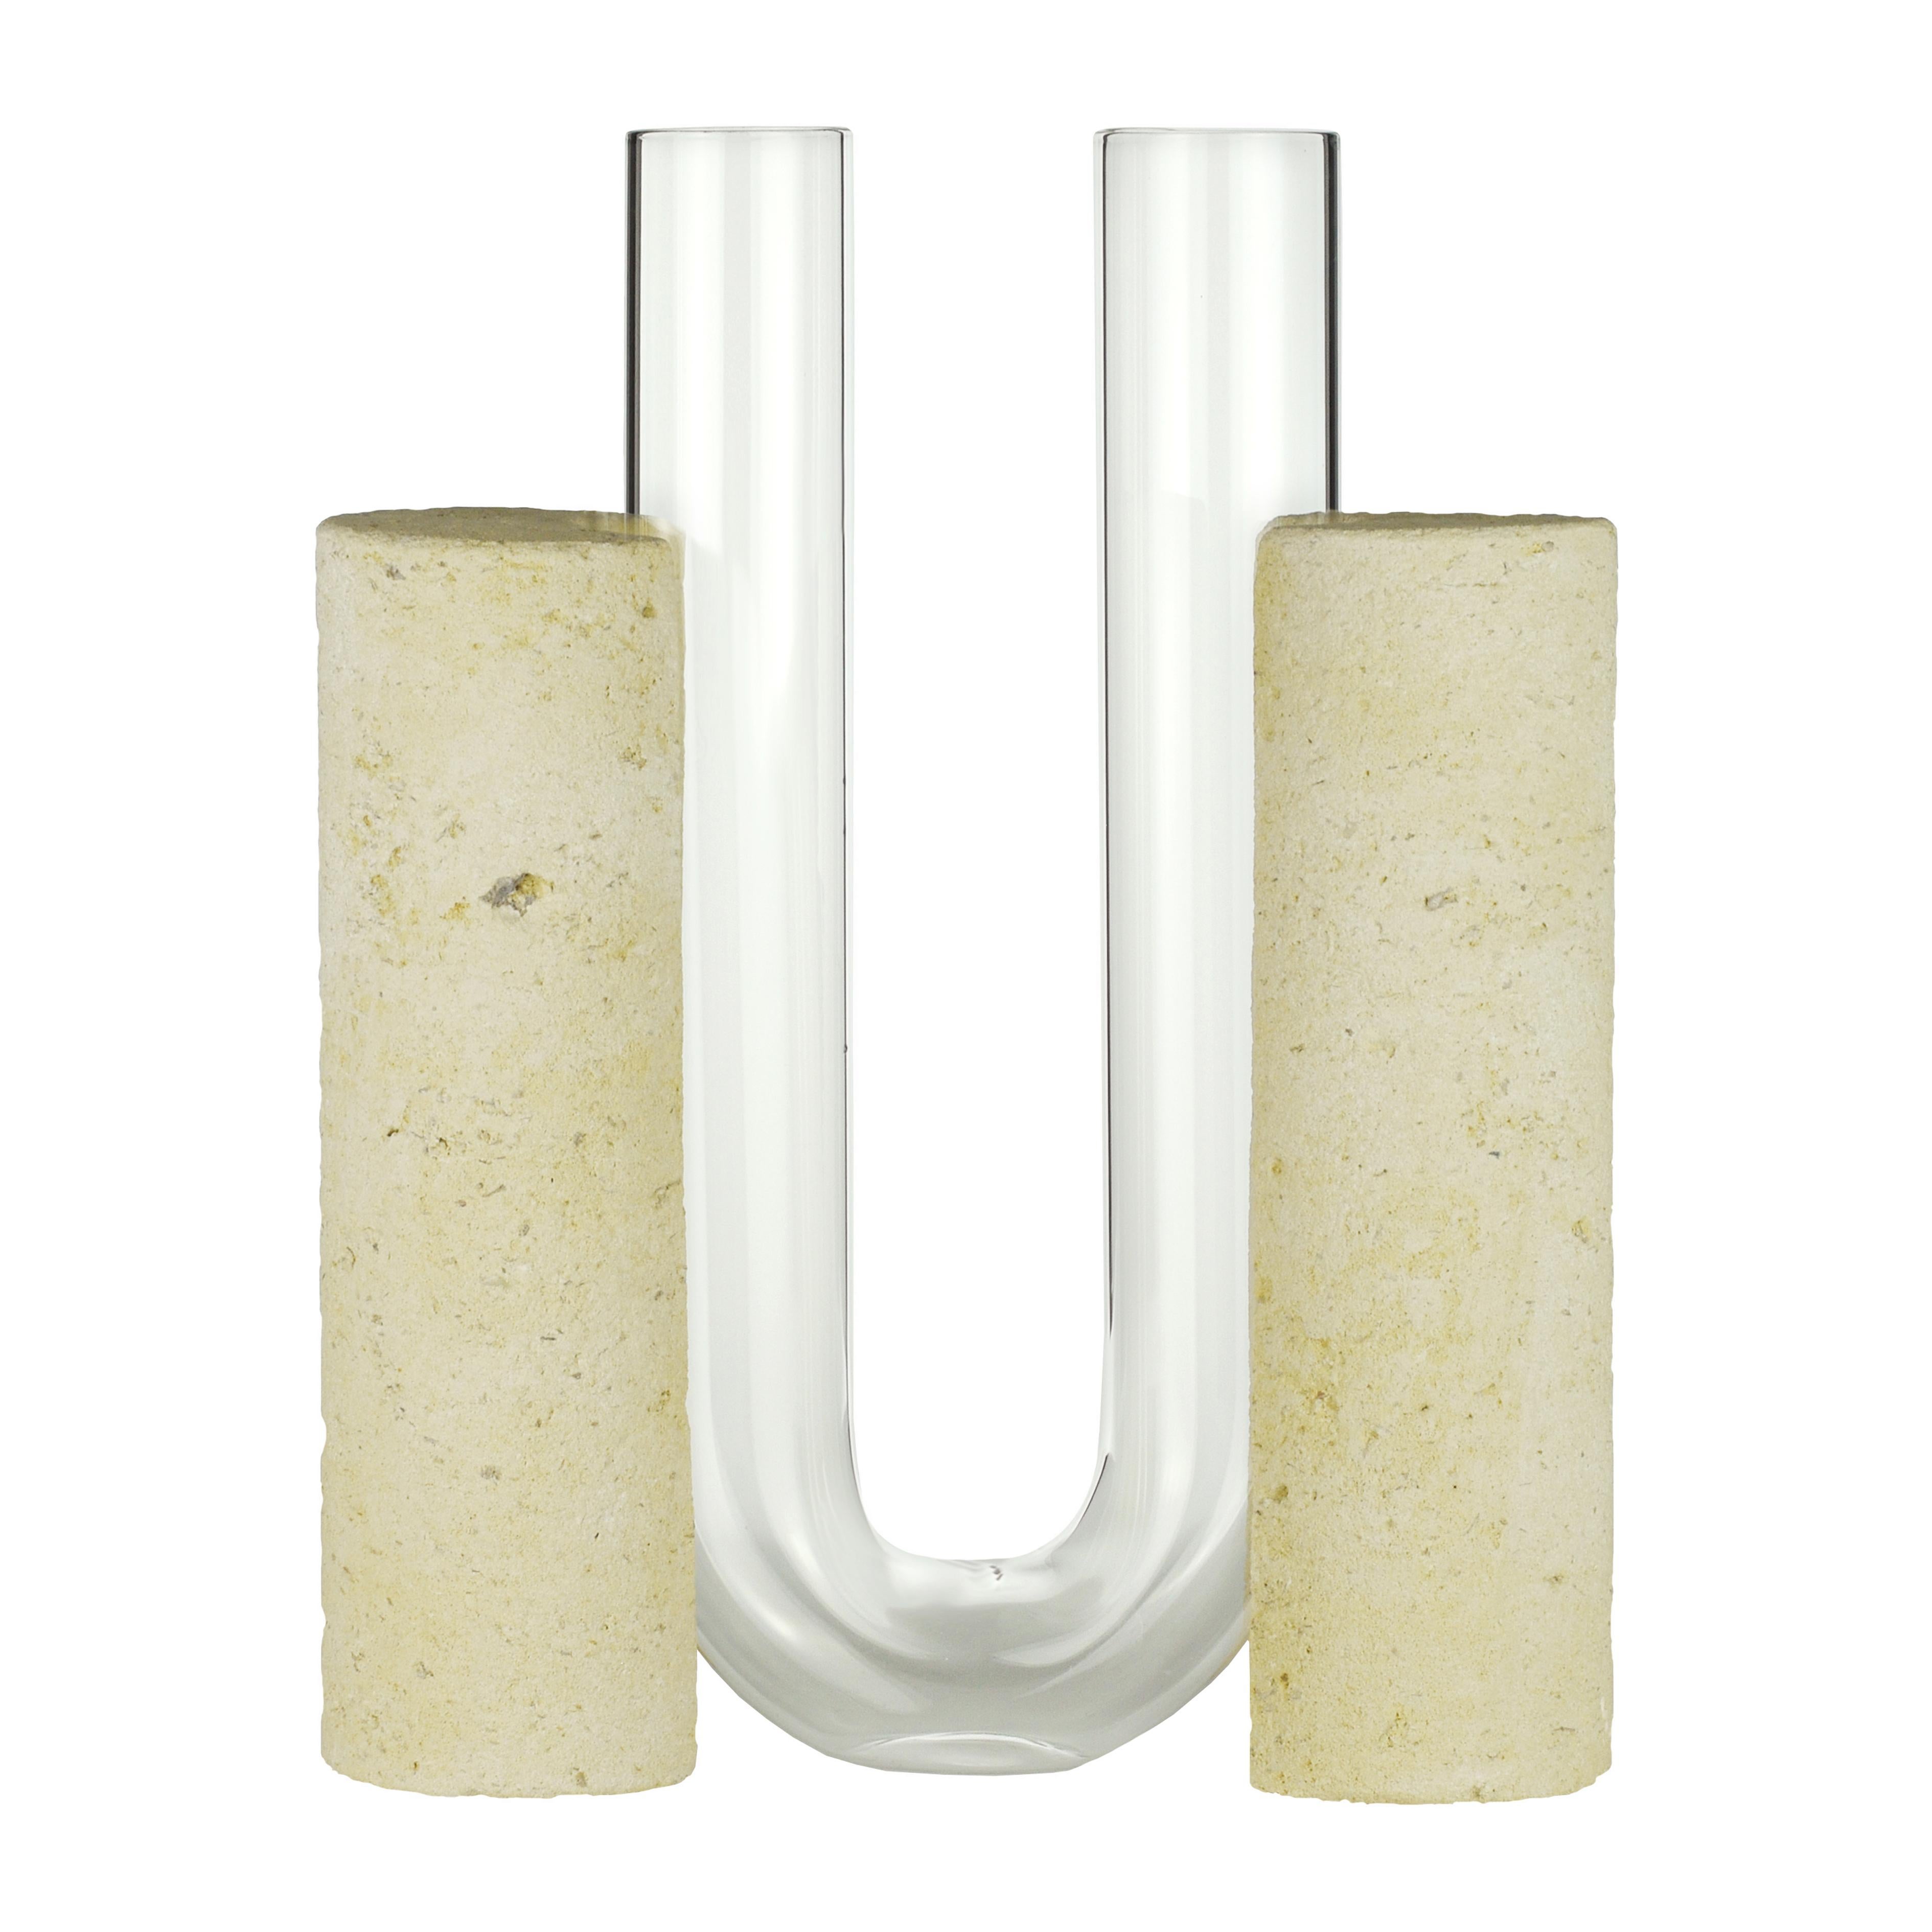 Clear Cochlea dello Sviluppo vase by Coki Barbieri
Dimensions: W 24 x D 8 x H 30 cm.
Materials: Handcrafted stone made with Matera stone fragments, sedimentary rocks of the Italian Apennines and pure water, yellow mineral pigments from Italian